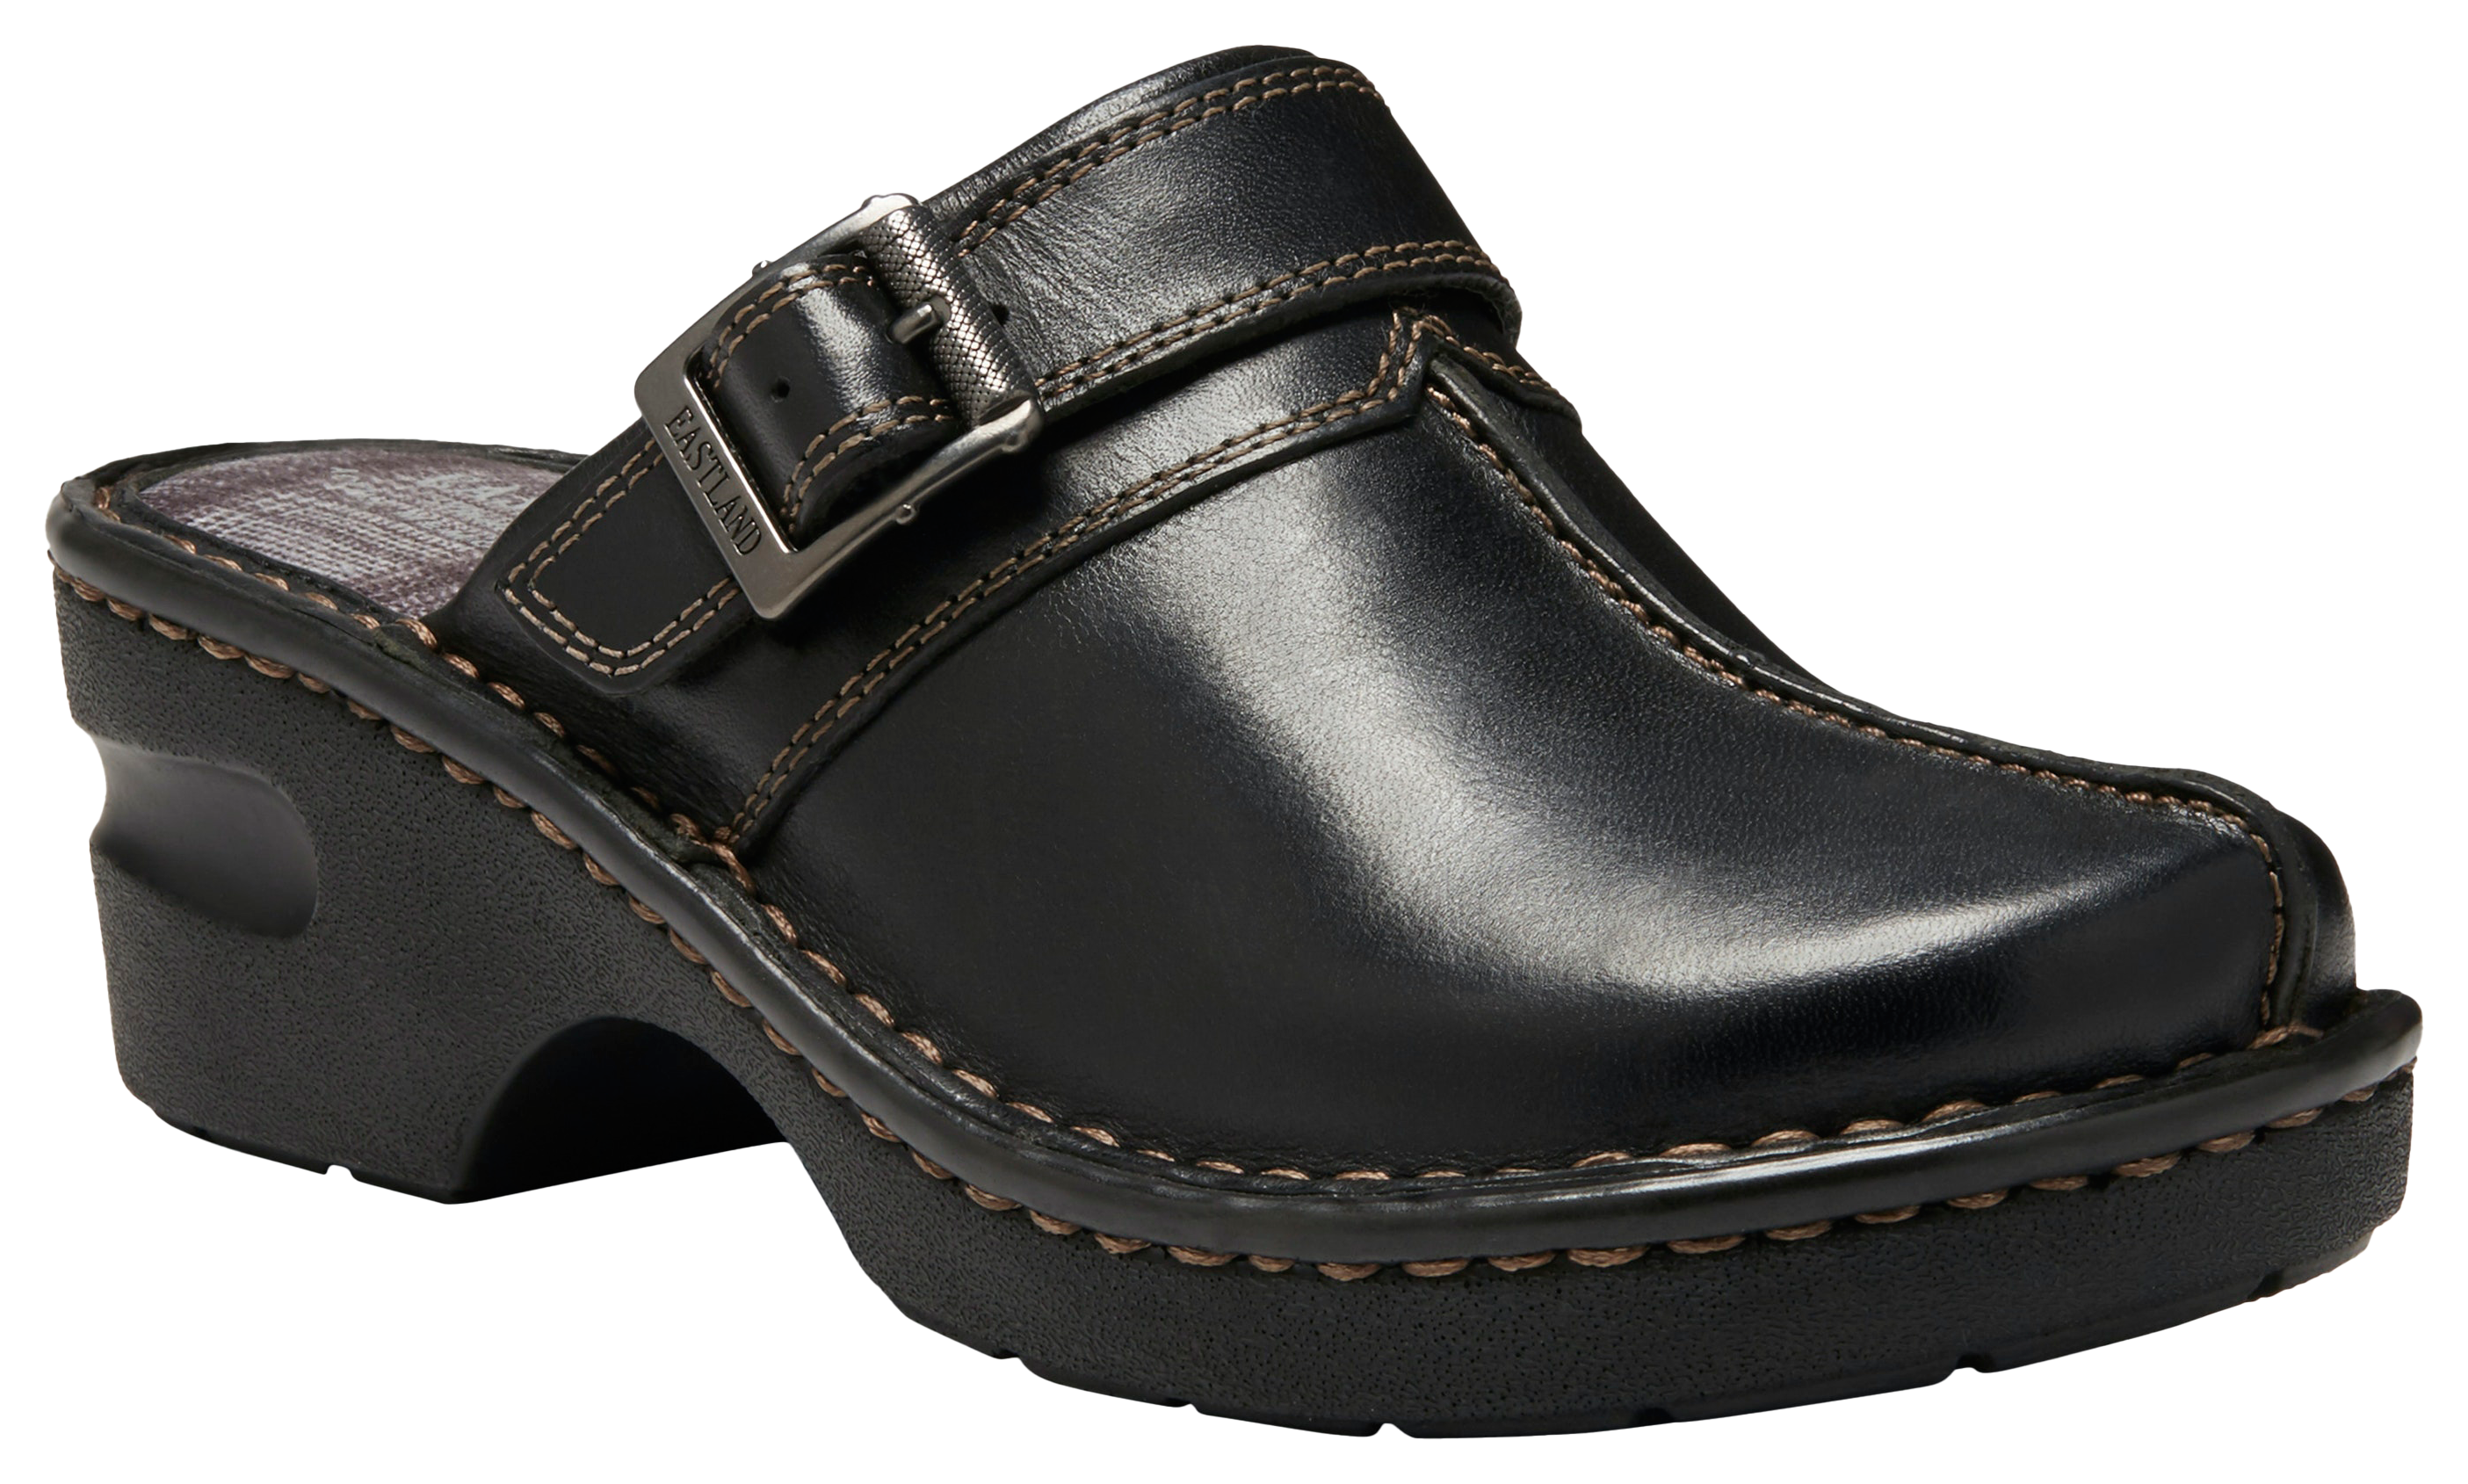 Eastland Mae Strap and Buckle Clogs for Ladies - Black - 9.5M